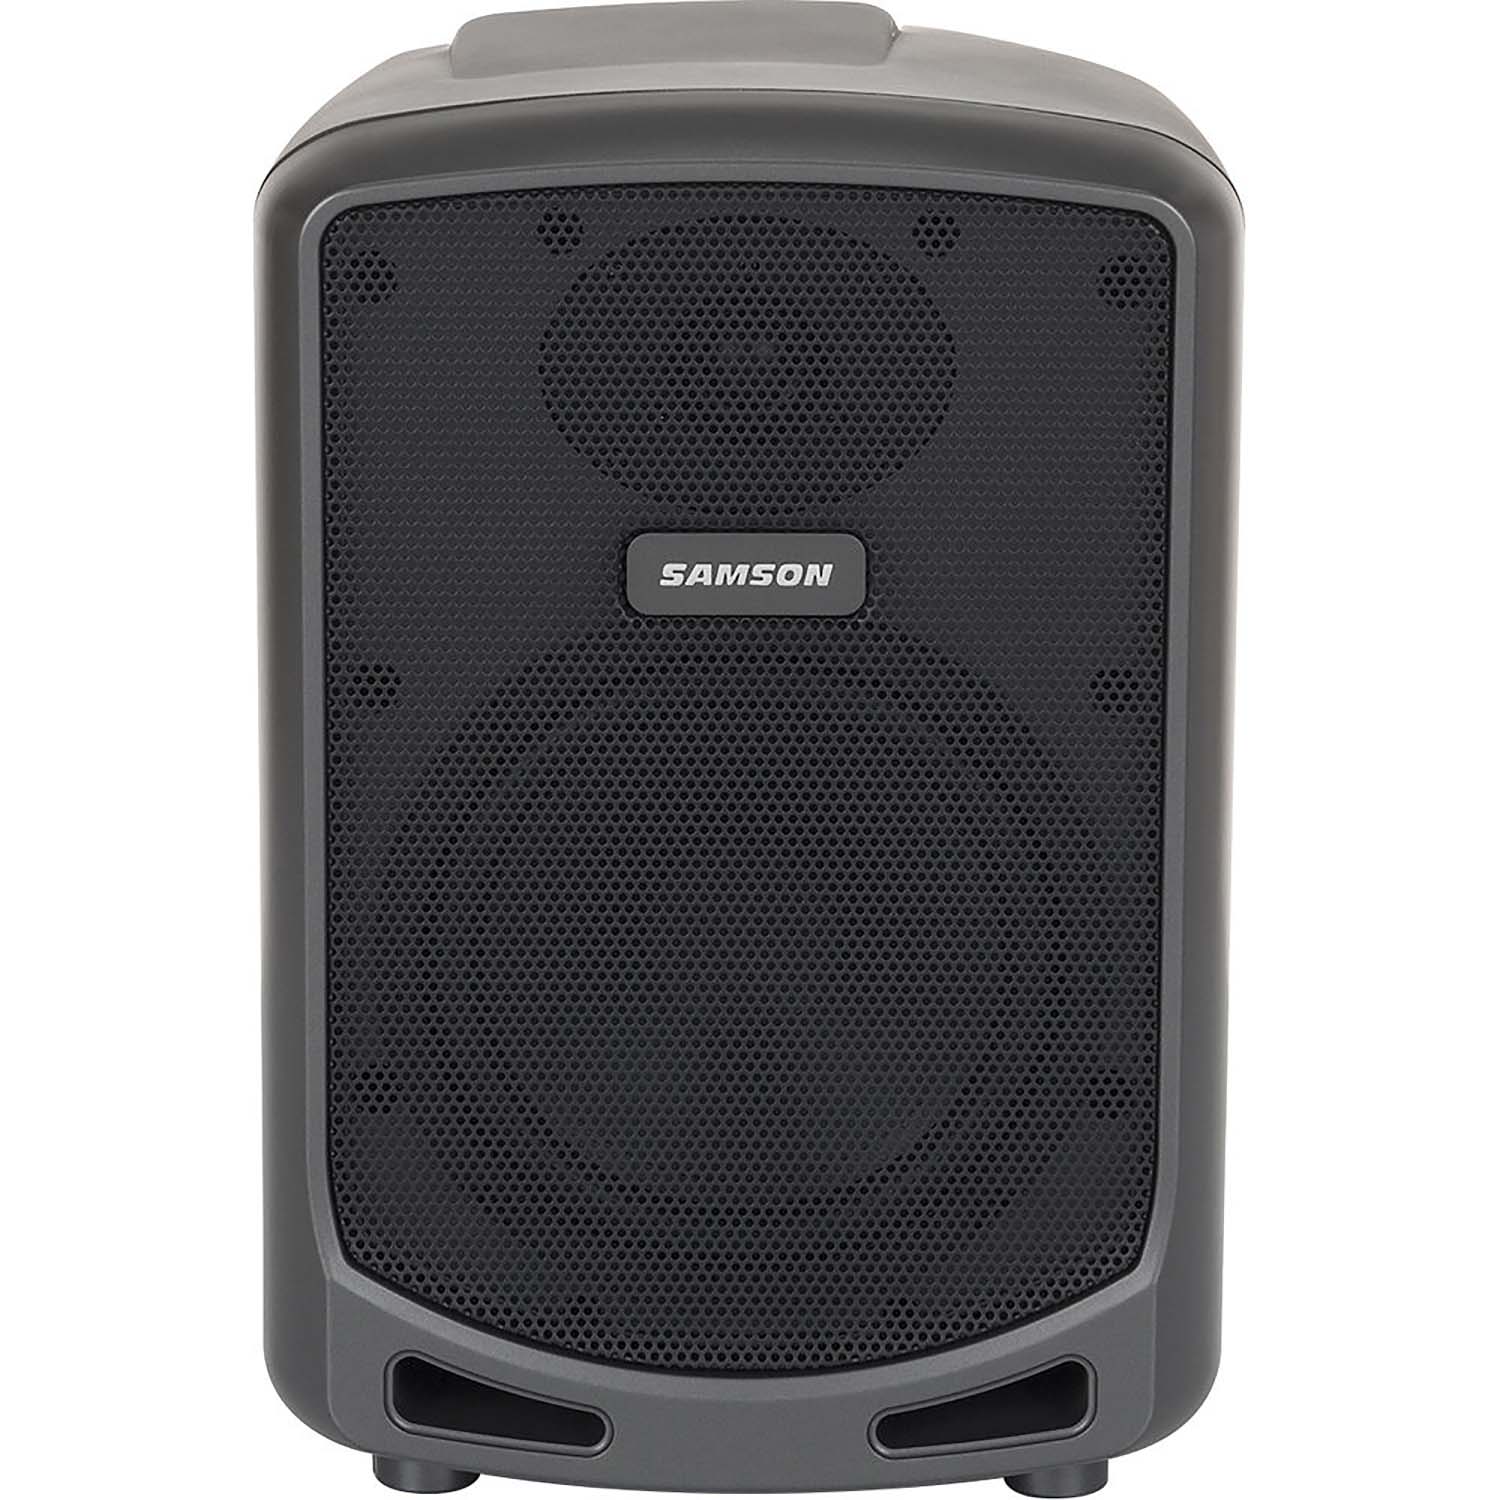 Samson SAXPEXPP Expedition Express+ 2-Way 75W Portable PA System with Wired Microphone - Hollywood DJ